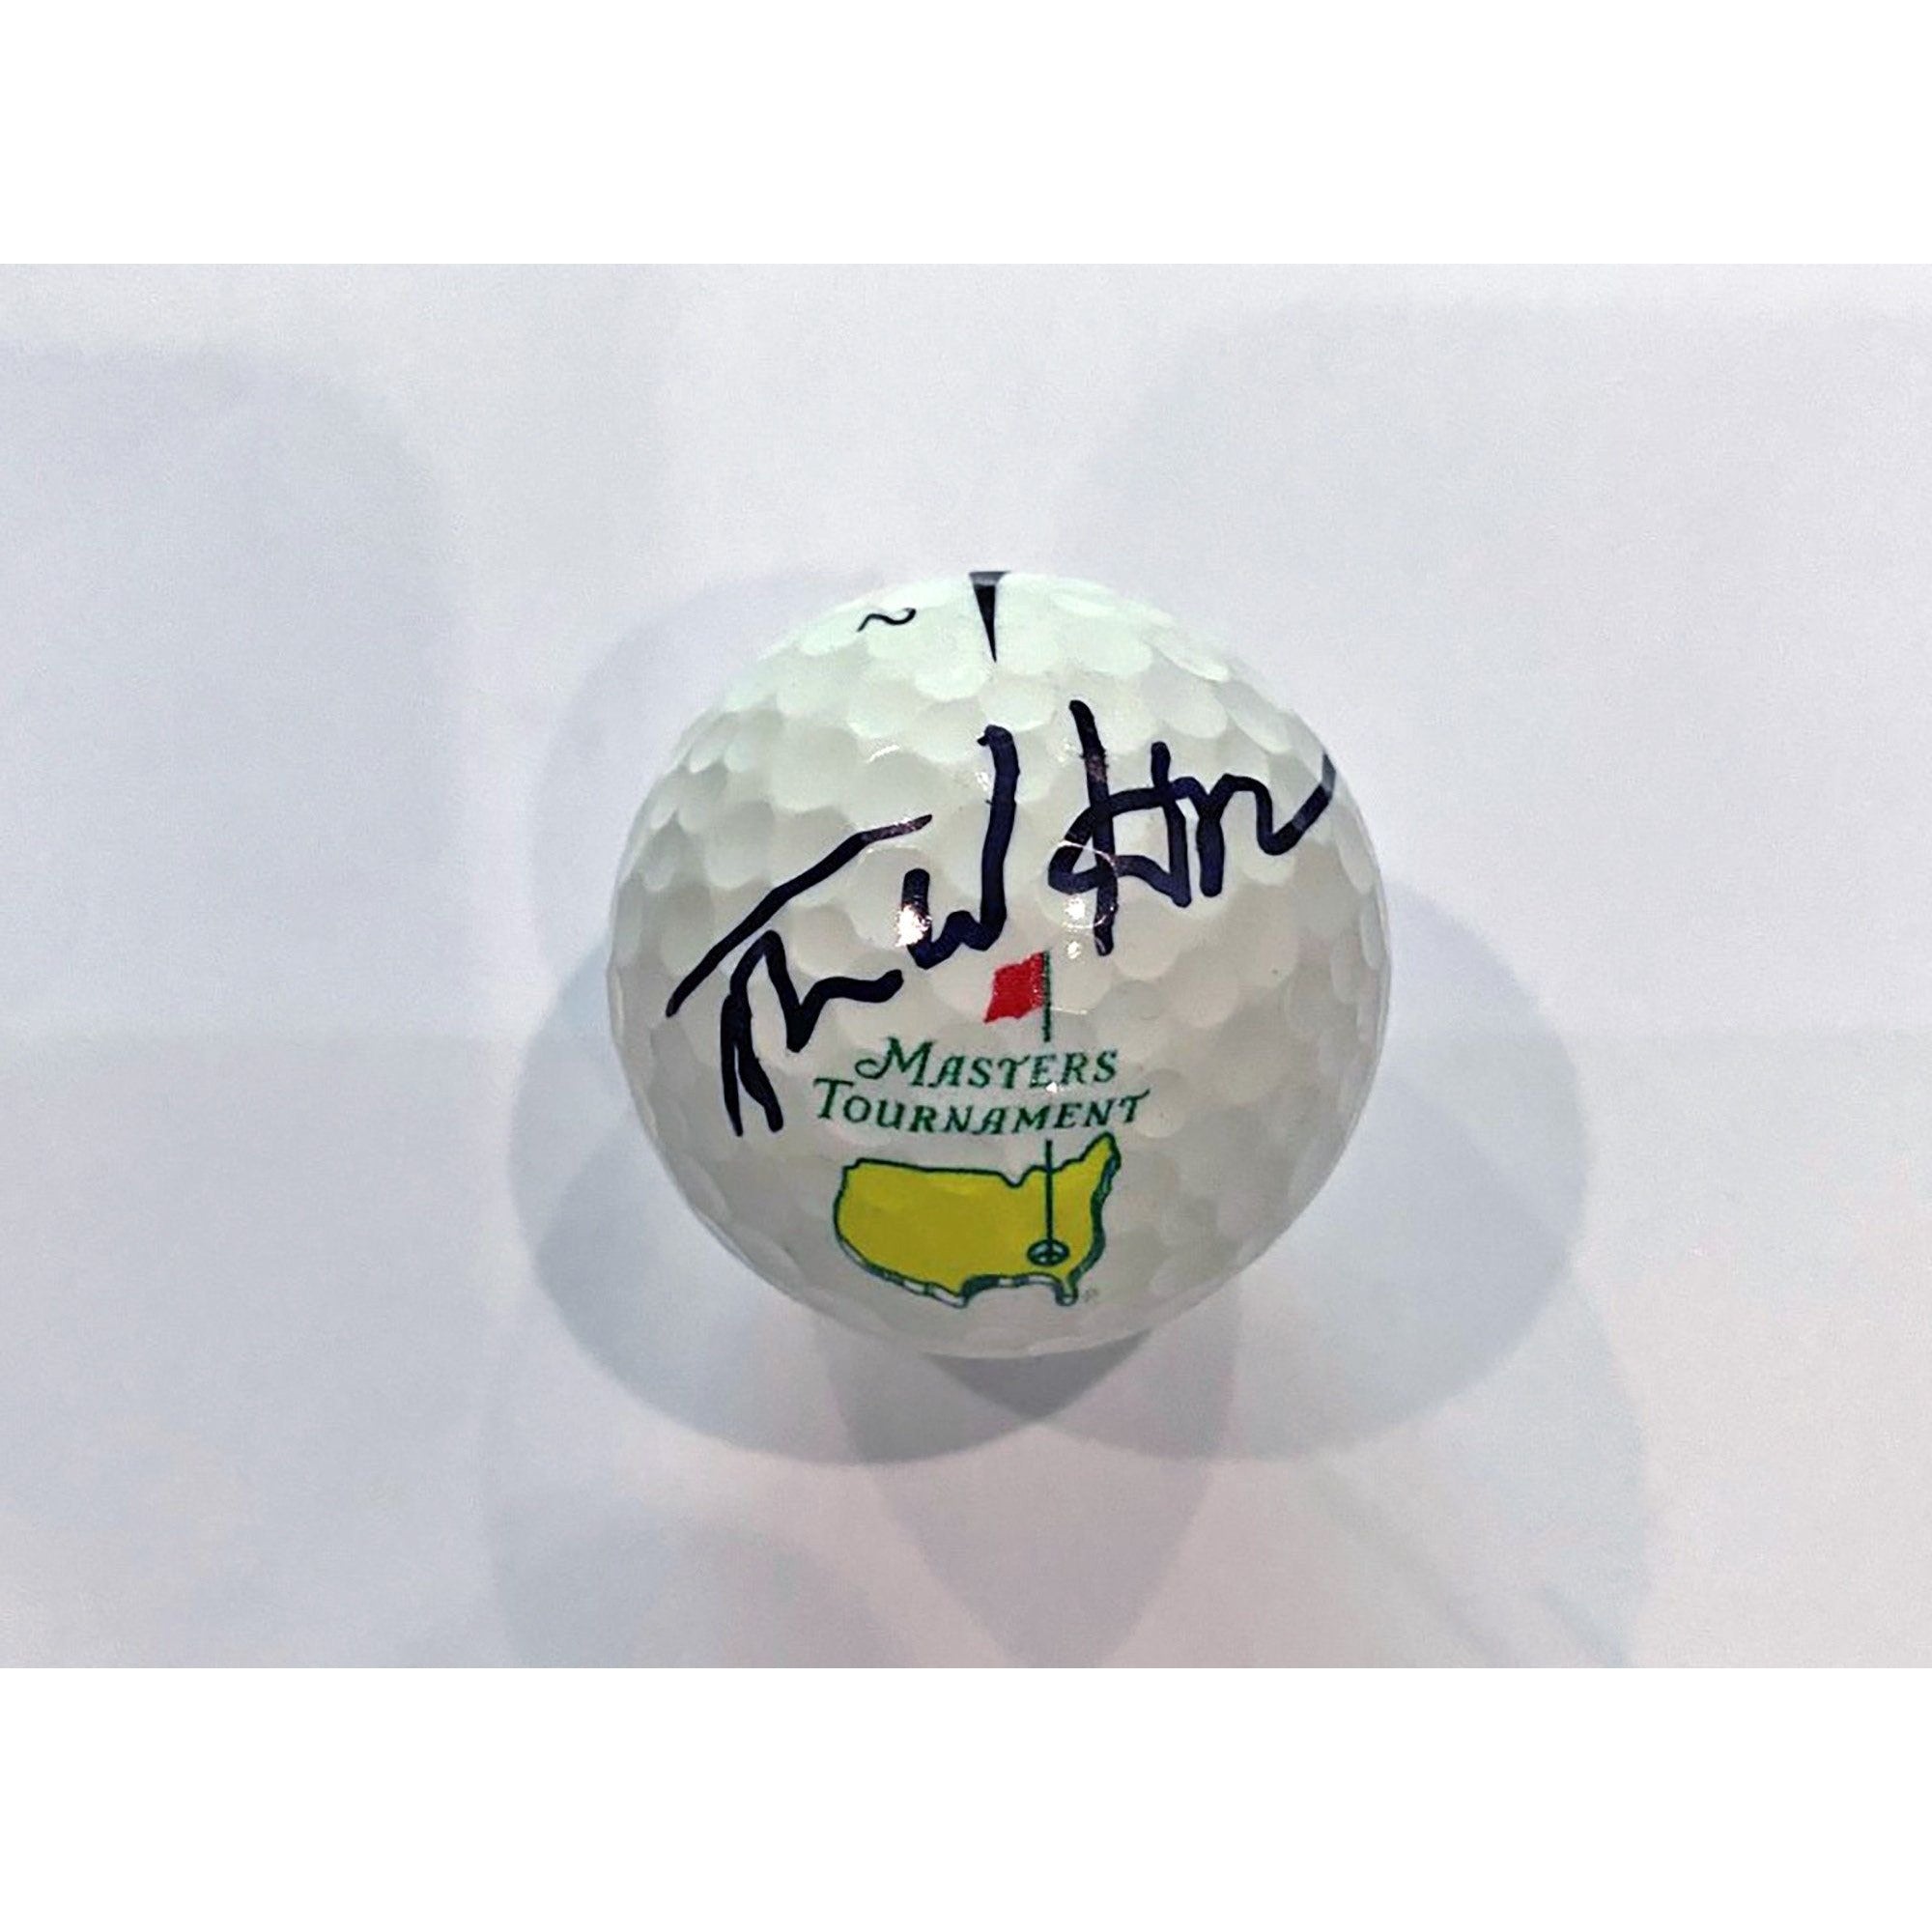 Tom Watson Master signed golf ball with proof